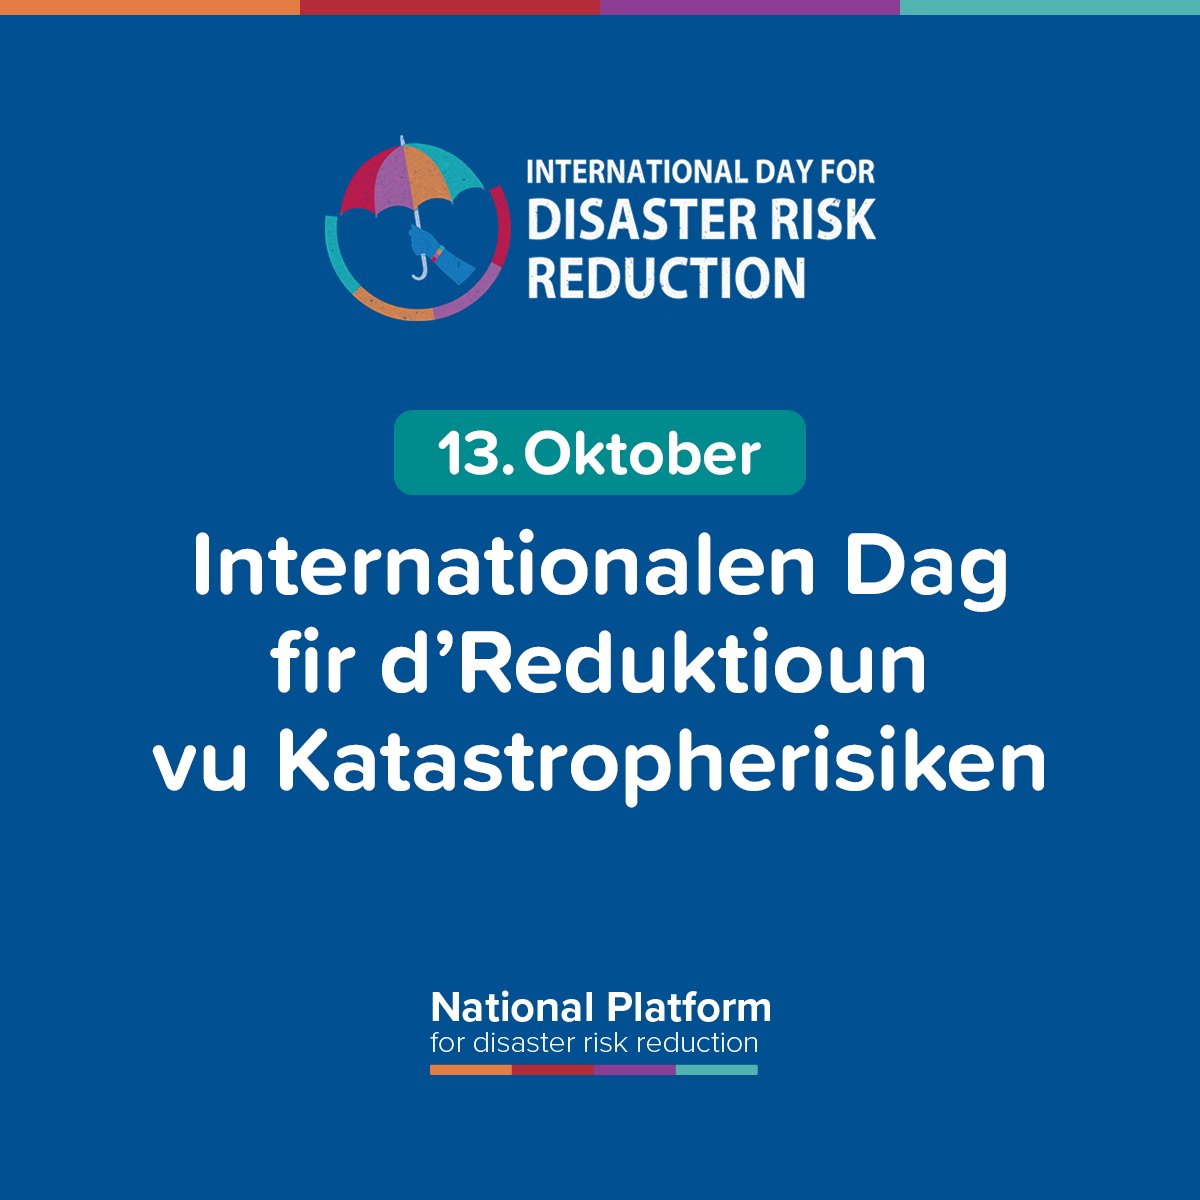 In 2020, I launched Luxembourgs national #DRR platform. We work on strenghtening risk management on all levels and the resilience of our communities to be better prepared for possible disasters. #DRRday #BreakTheCycle #ItsAllAboutGovernance @UNDRR @MINTLuxembourg @gouv_lu